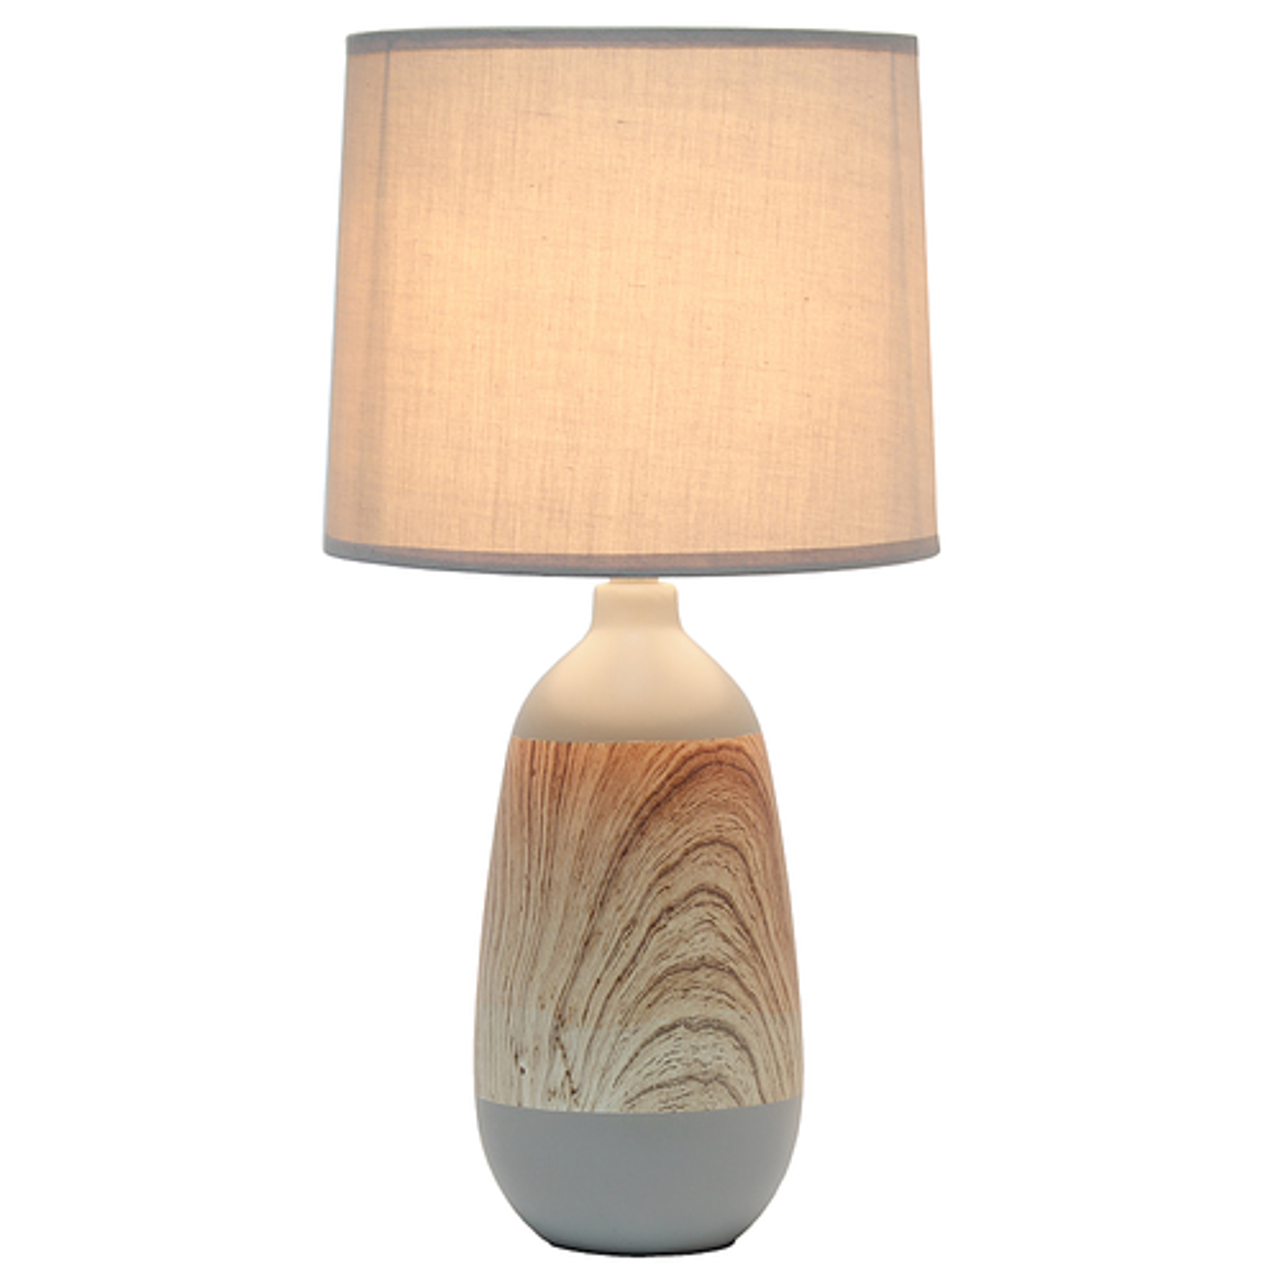 Simple Designs Ceramic Oblong Table Lamp, Light Wood and Gray - Gray/light wood